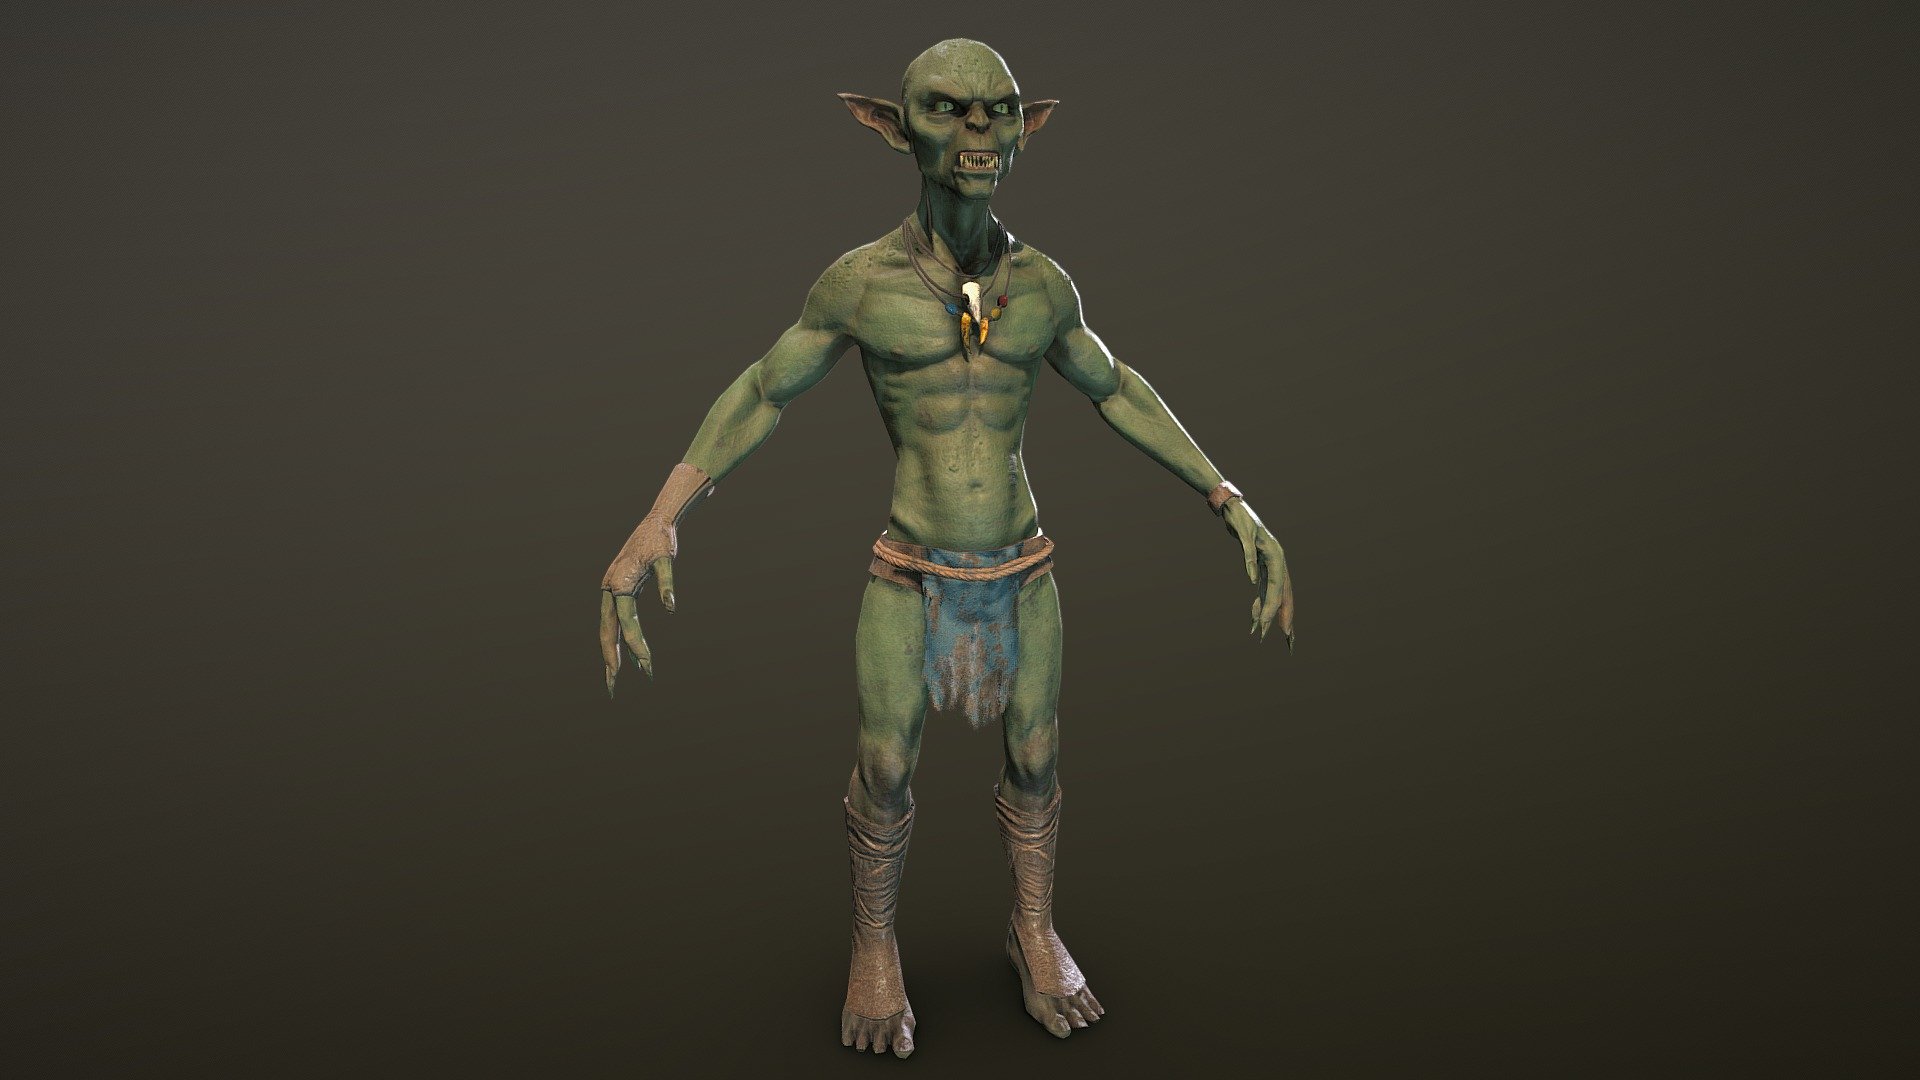 This is a deprecated model and no longer will be used. NEW MODEL: https://skfb.ly/6ZVTs
Goblin model I done for Skyblivion Project with the help of the projectr devs.
This version of the goblin is regular and have no tribal marks.

Tools used: Zbrush, Substance painter, Blender - Goblin - Skyblivion [deprecated] - 3D model by Weekend 3d model